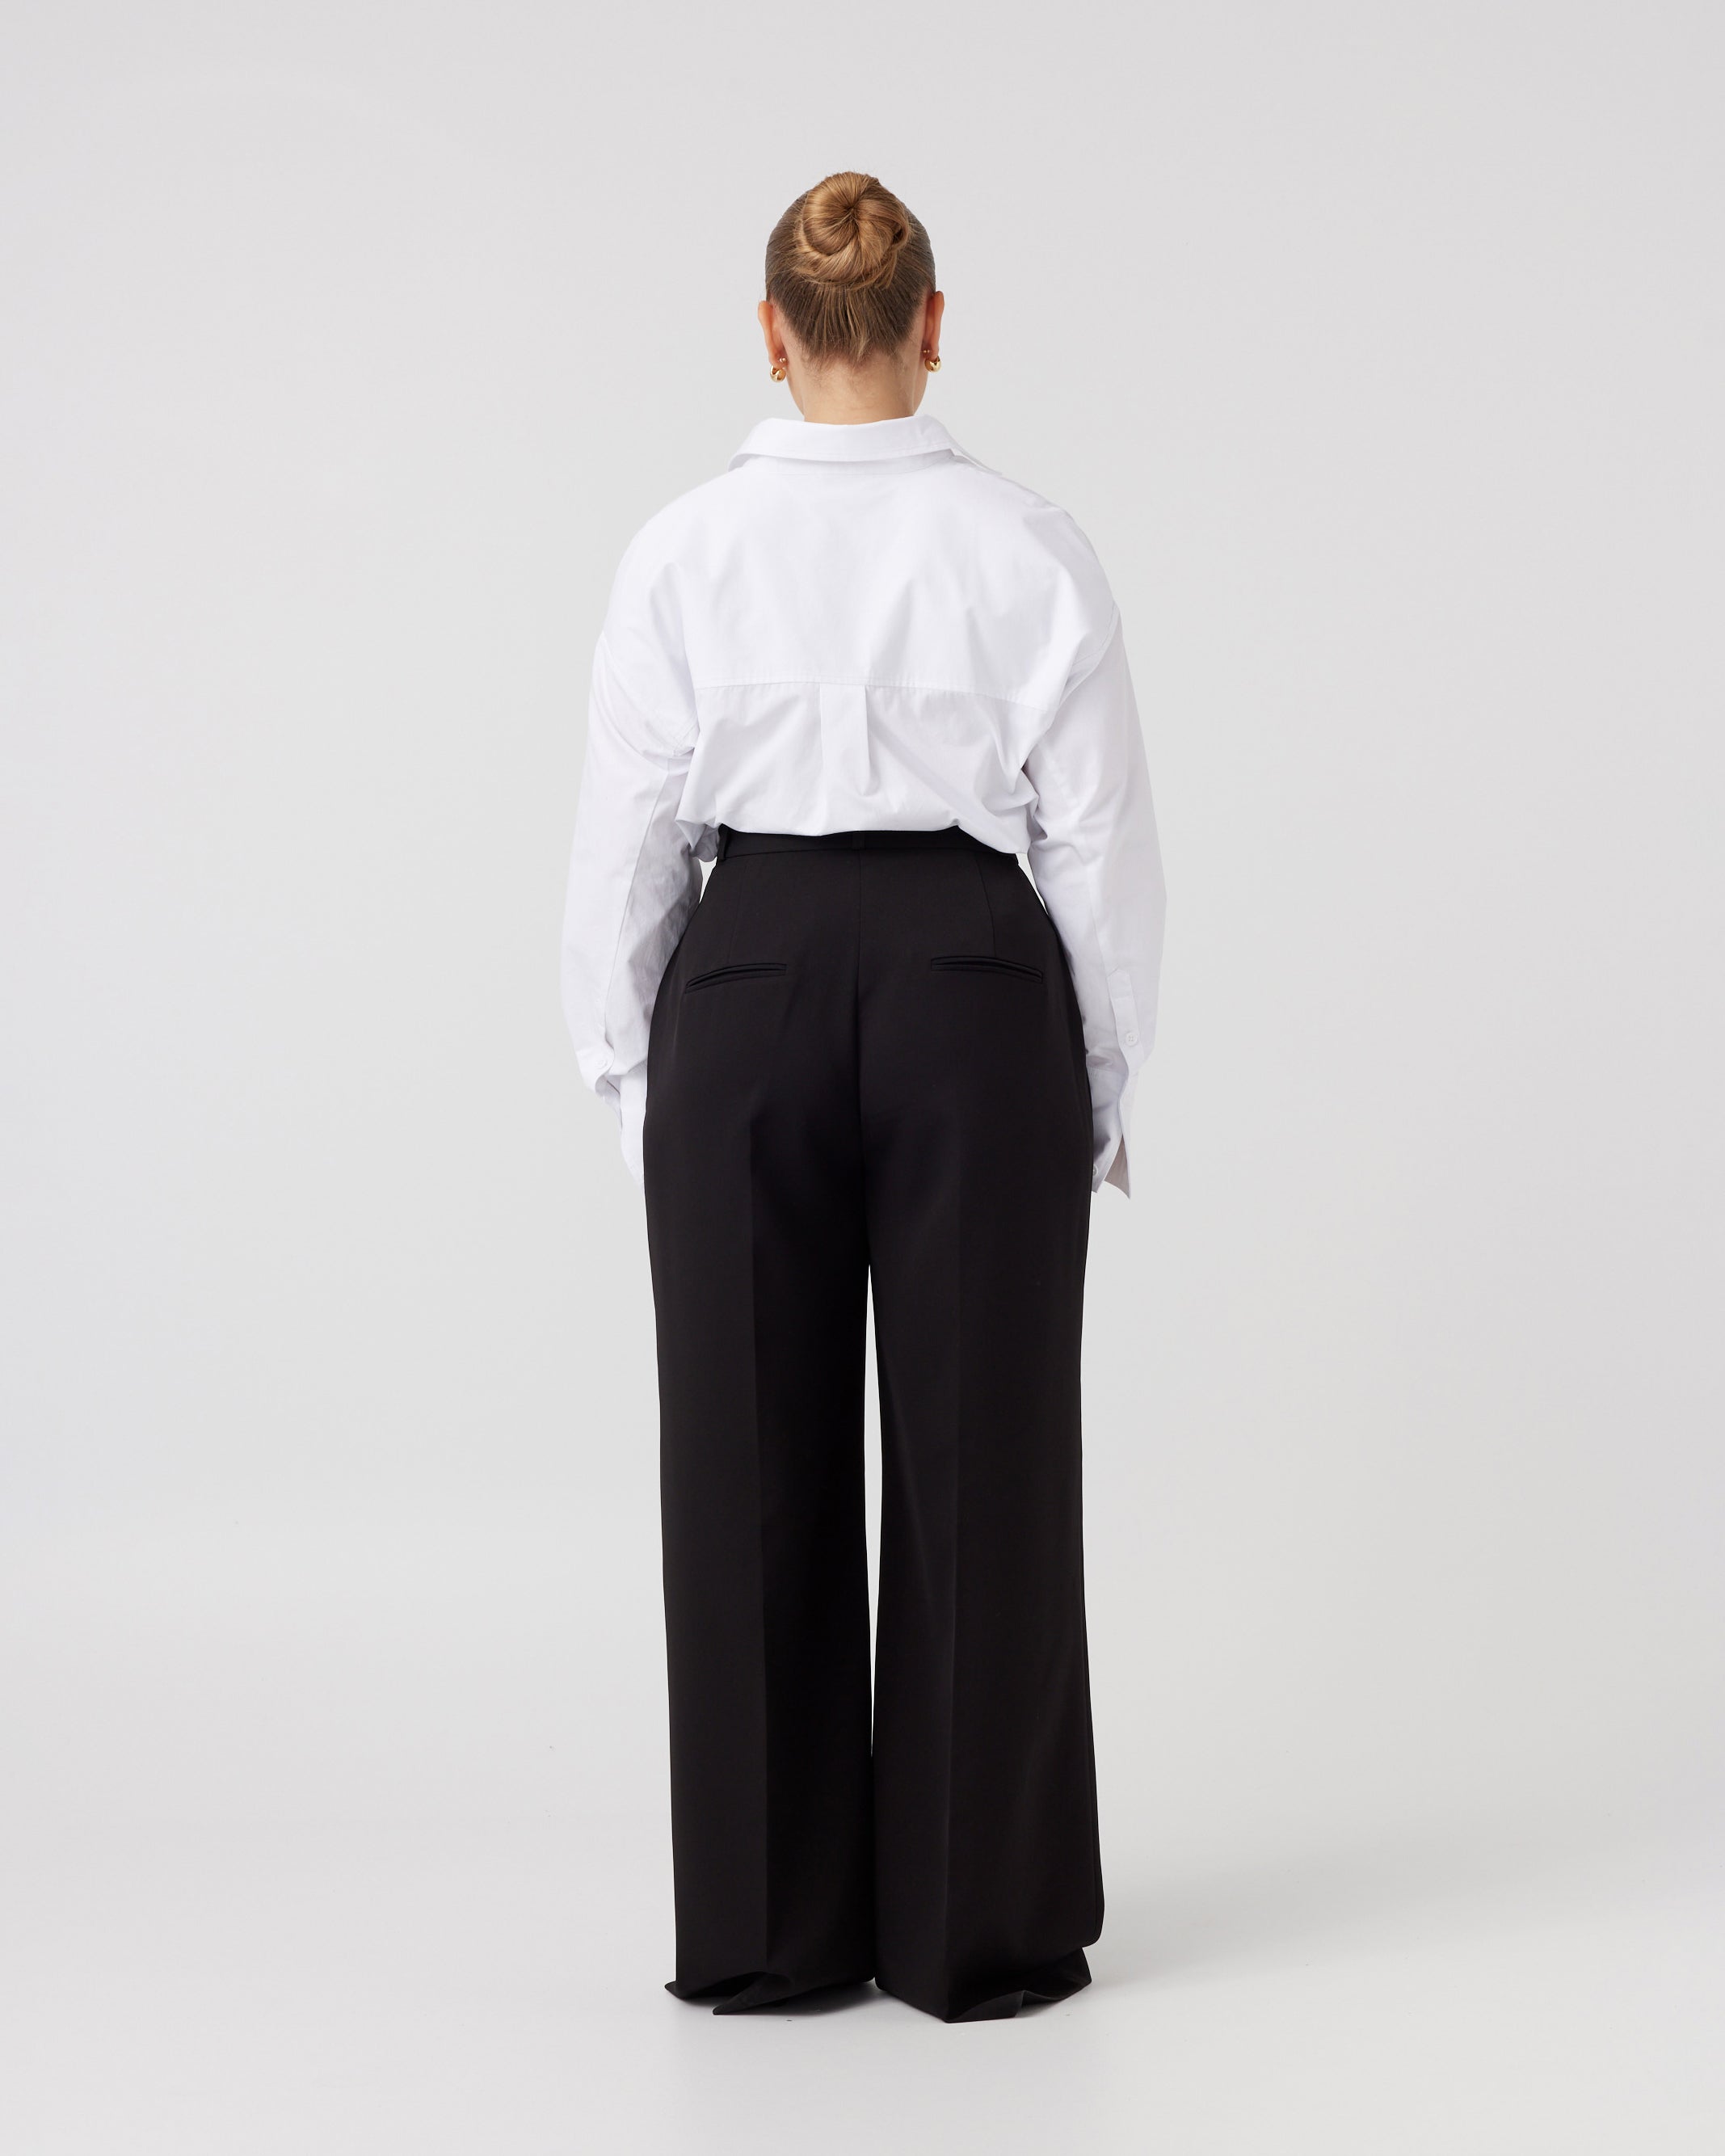 Photograph of the back of a youthful woman with dark blonde hair pulled back wearing a crisp white shirt neatly tucked into a pair of minimalistic black high waisted wide leg trousers.